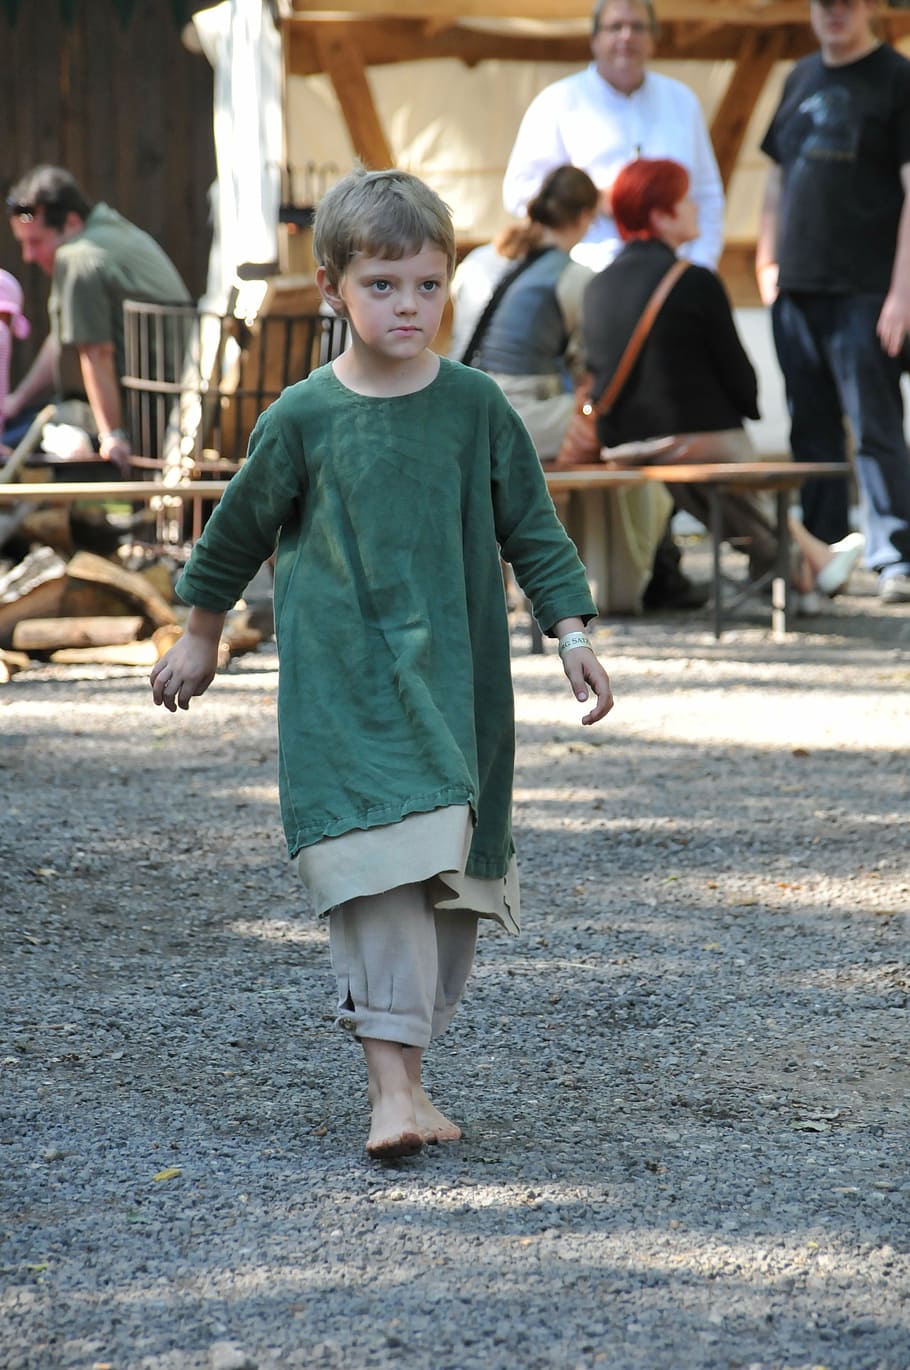 middle ages, market, boy, barefoot, incidental people, full length, child, childhood, casual clothing, boys